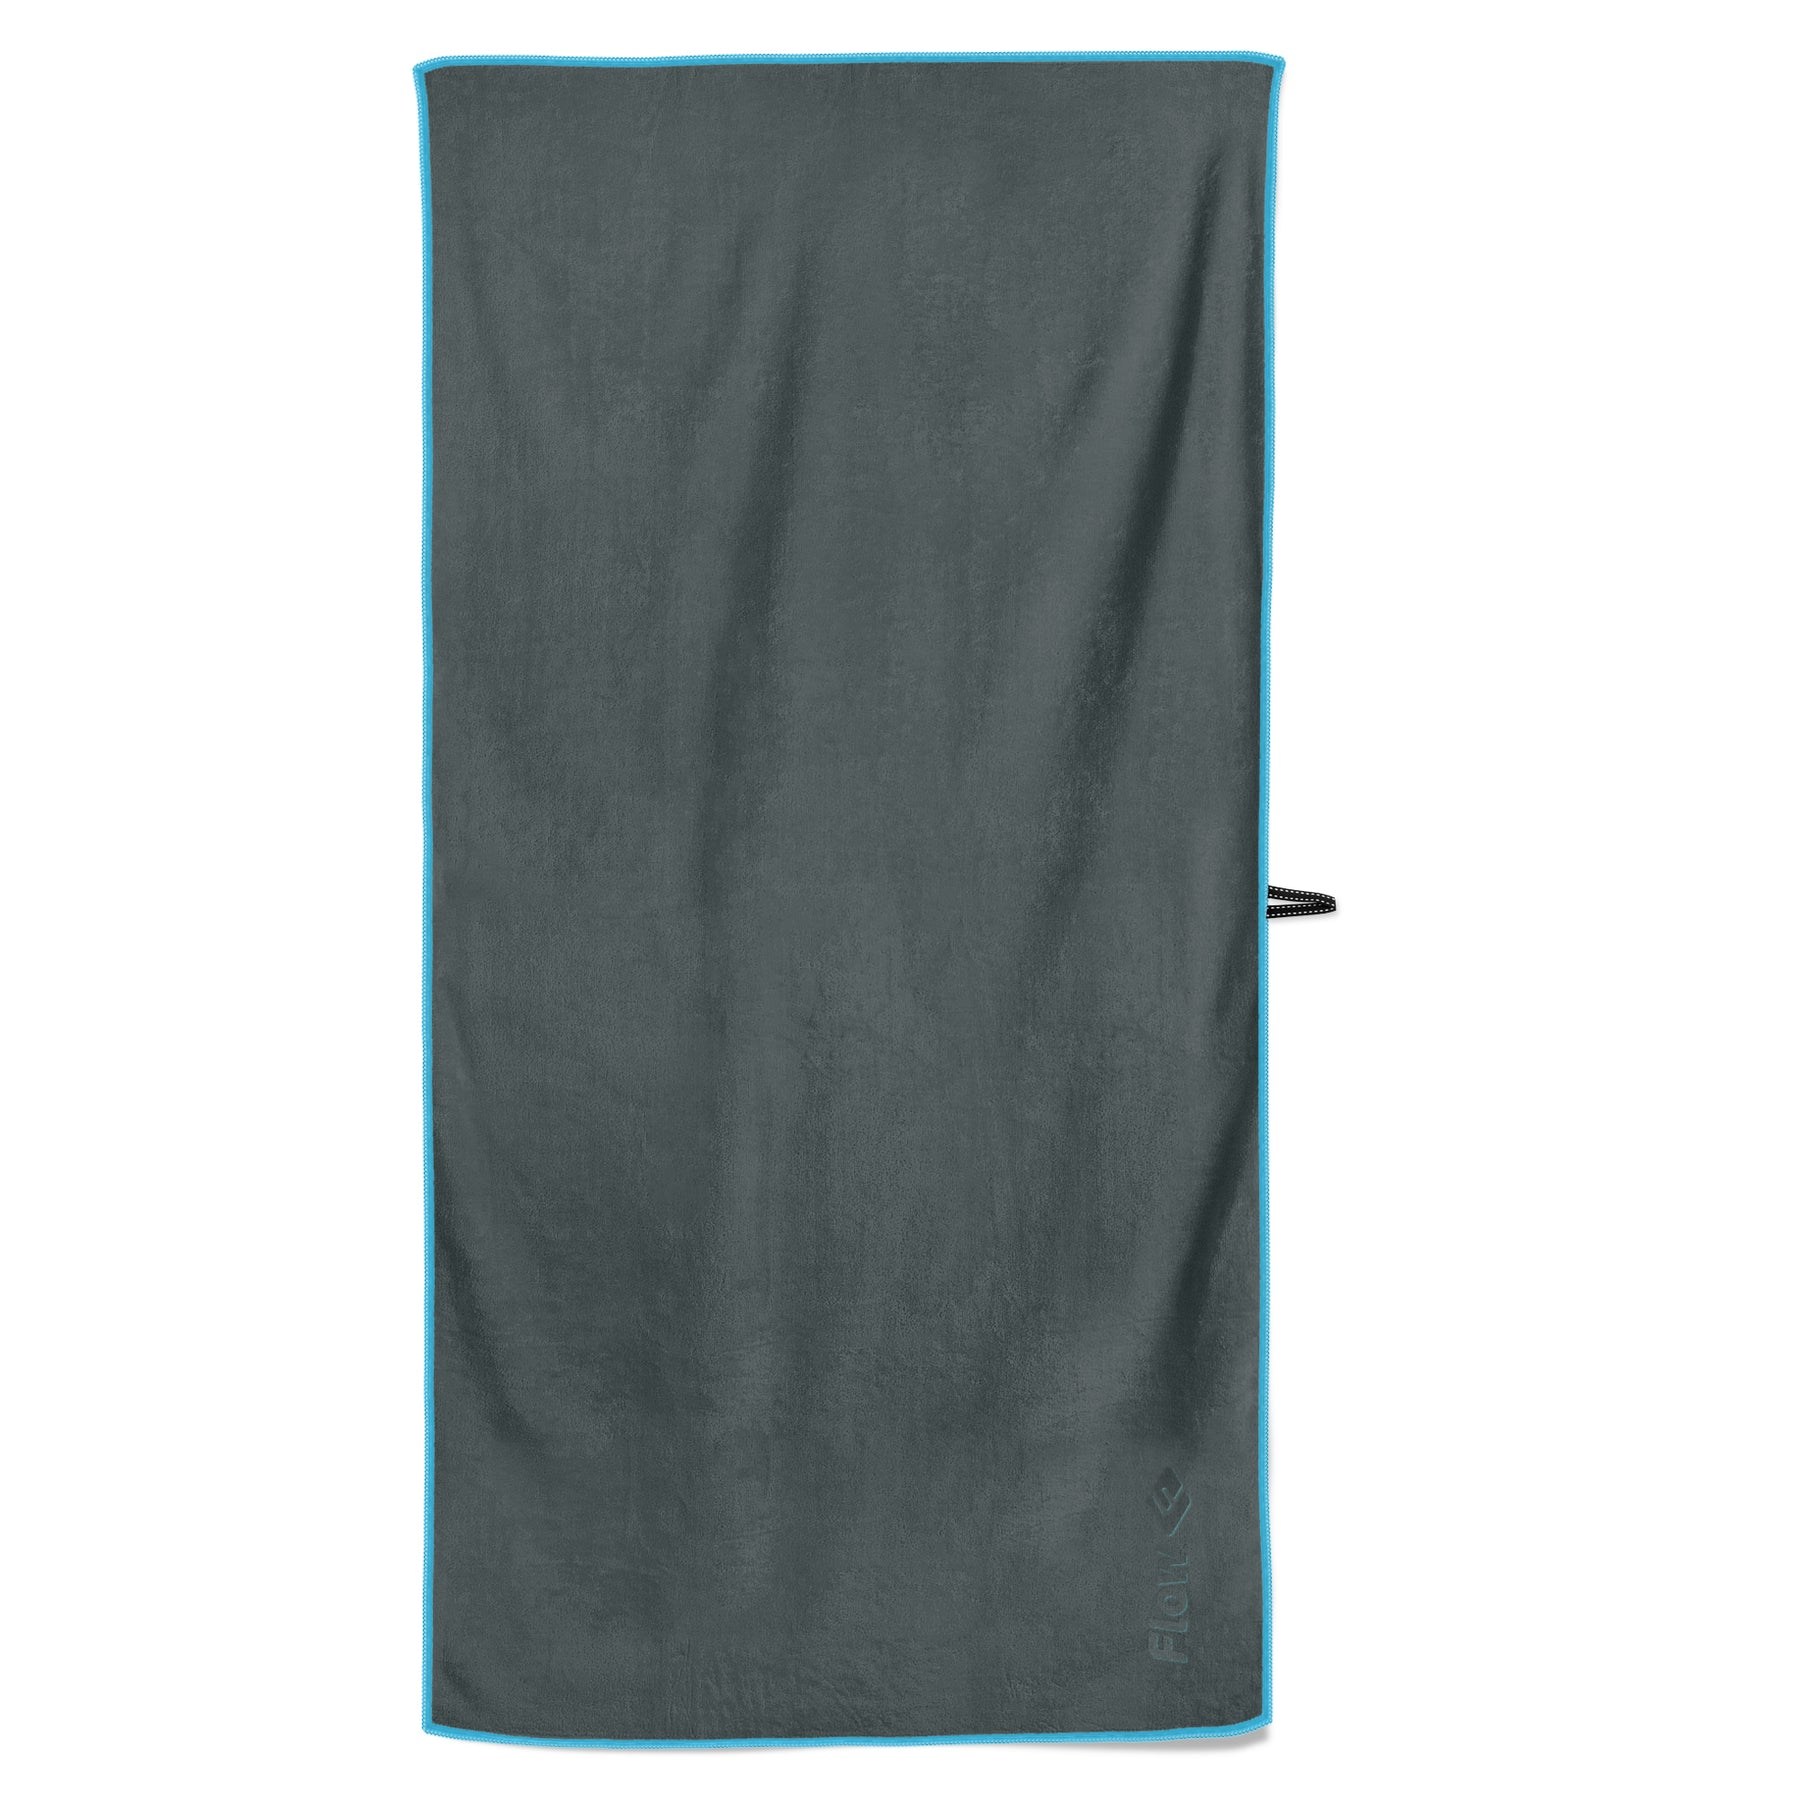 Luxe PackTowl, Soft, Absorbent, Microfiber Towel